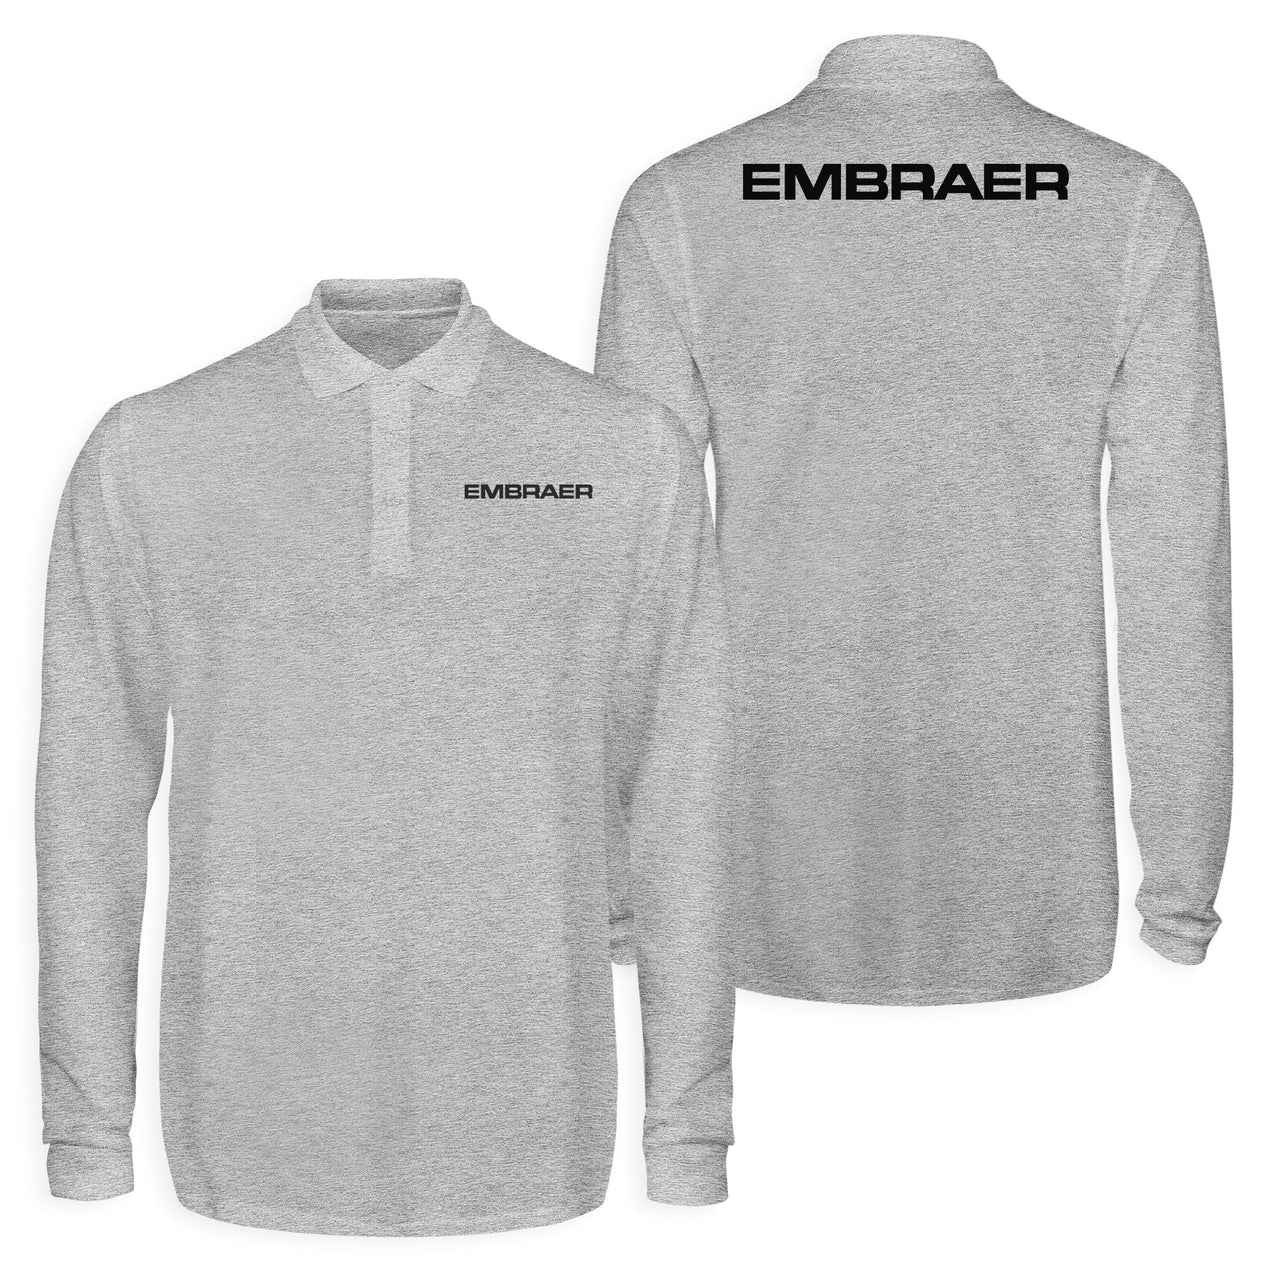 Embraer & Text Designed Long Sleeve Polo T-Shirts (Double-Side)